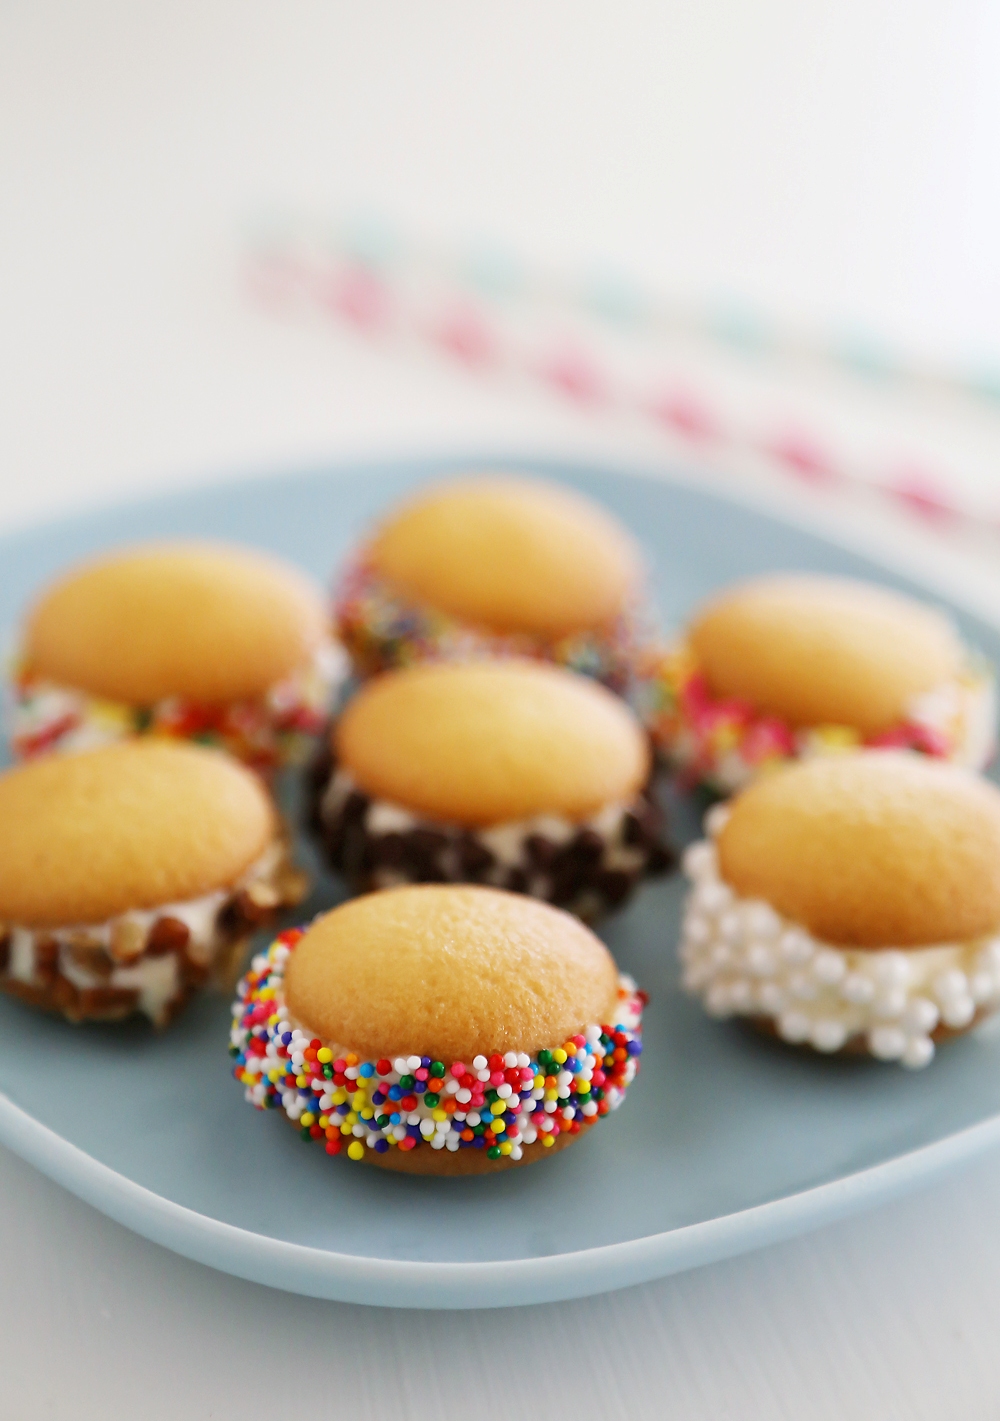 Mini Vanilla Wafer Ice Cream Sandwiches – The perfect quick + easy frozen treat! Roll in your favorite toppings and enjoy. thecomfortofcooking.com